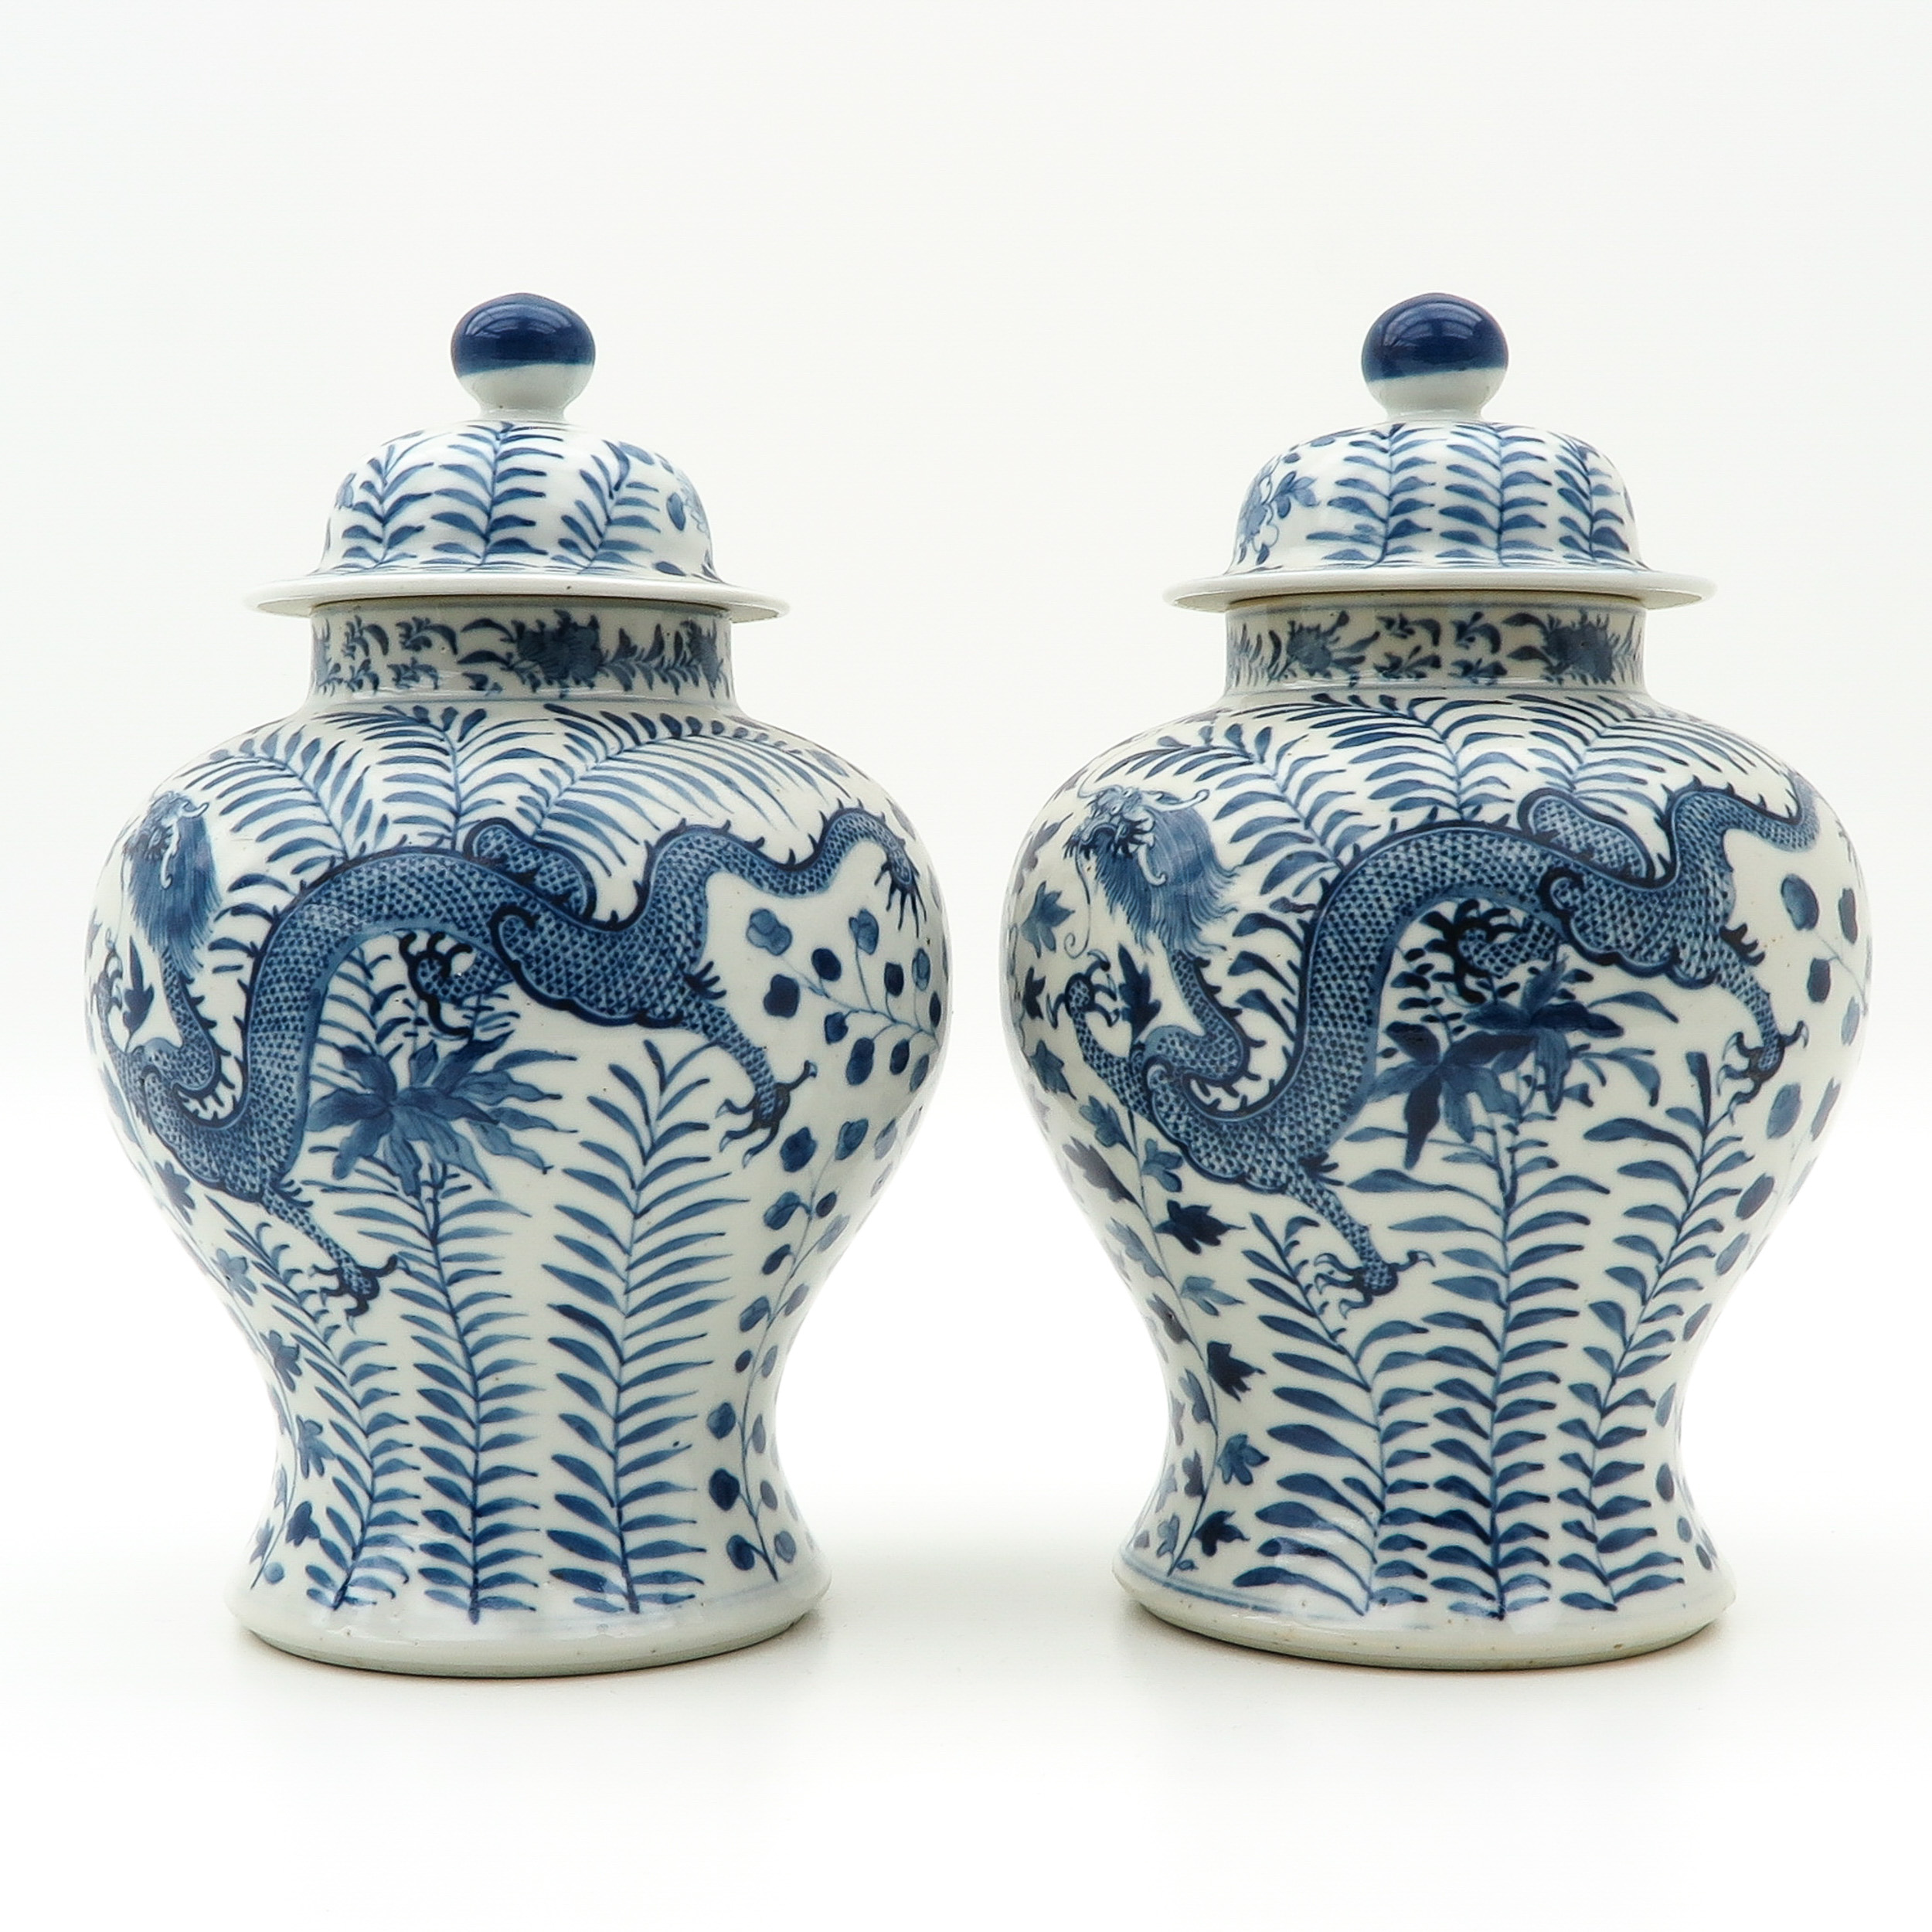 A Pair of Temple Jars with Covers - Image 2 of 9